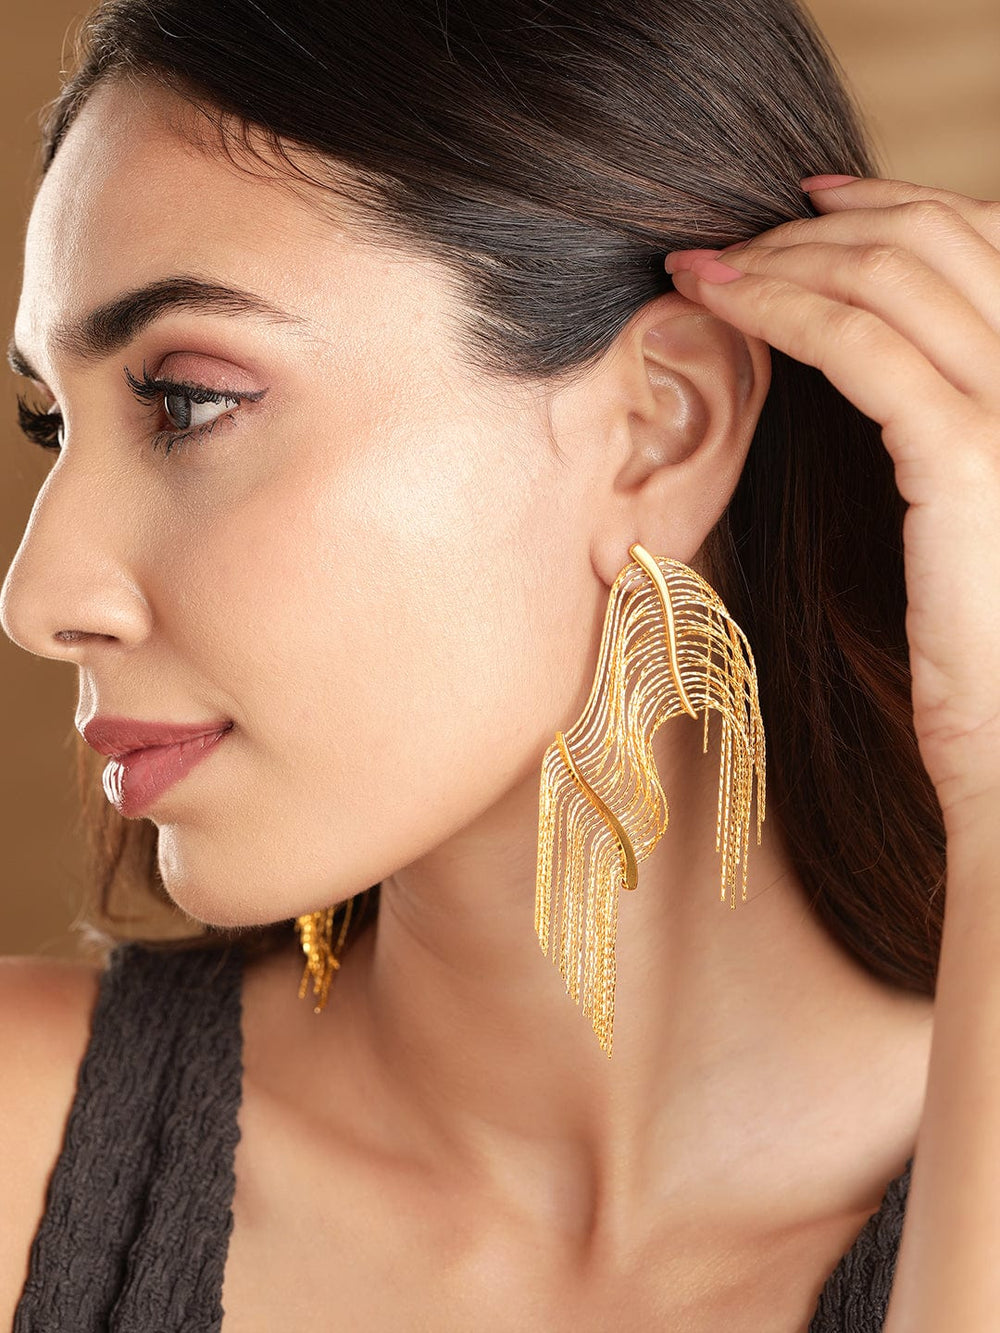 Copy of Tokyo Talkies X Rubans Fashion Accessories Gold-Plated  Off-White Contemporary Earrings Earrings